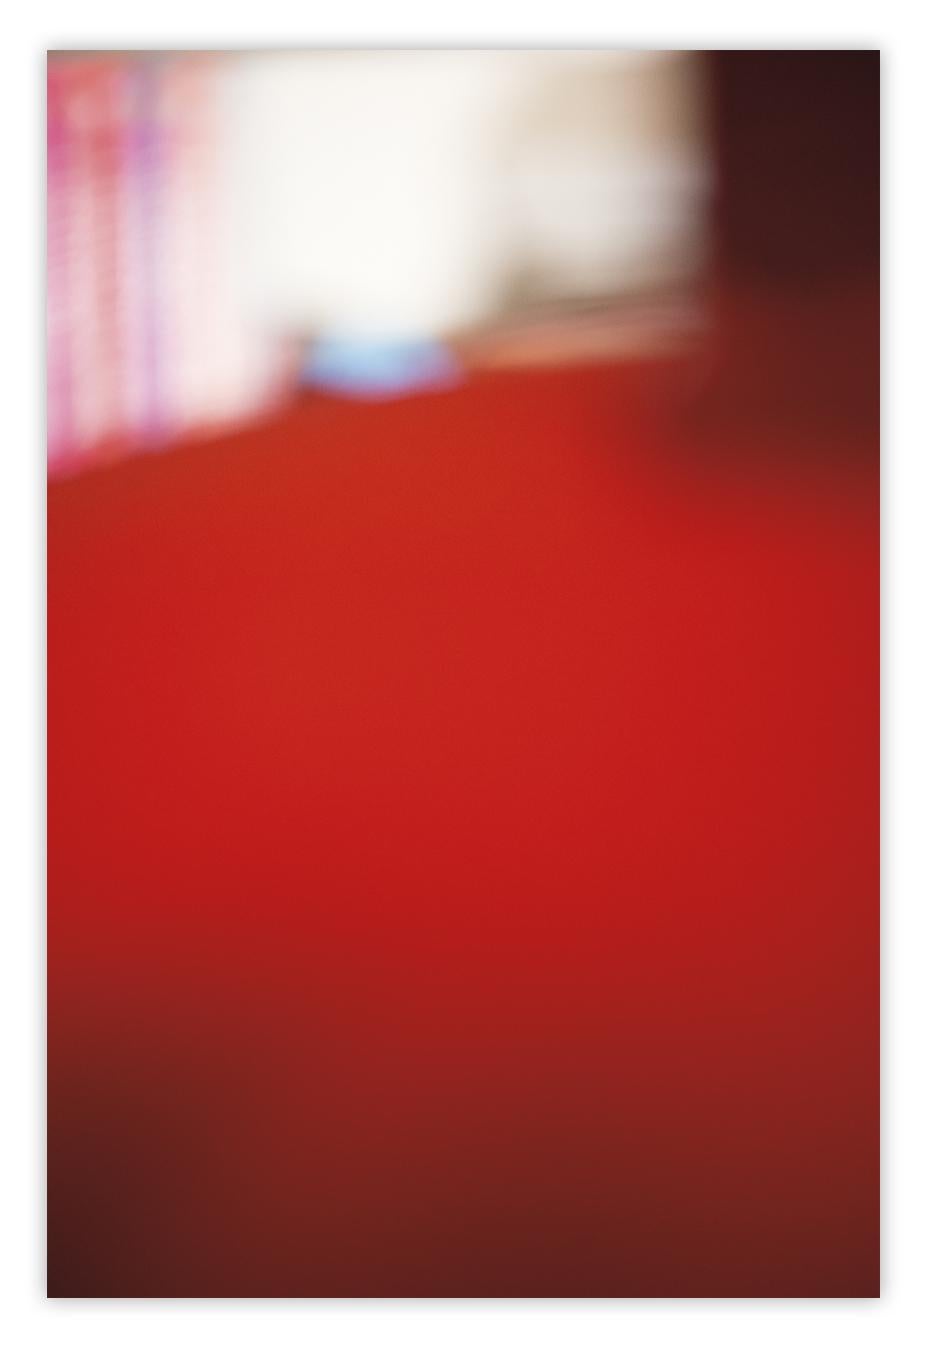 Jurek Wajdowicz Abstract Photograph - Untitled, 8AF_8997 large (Abstract photography)